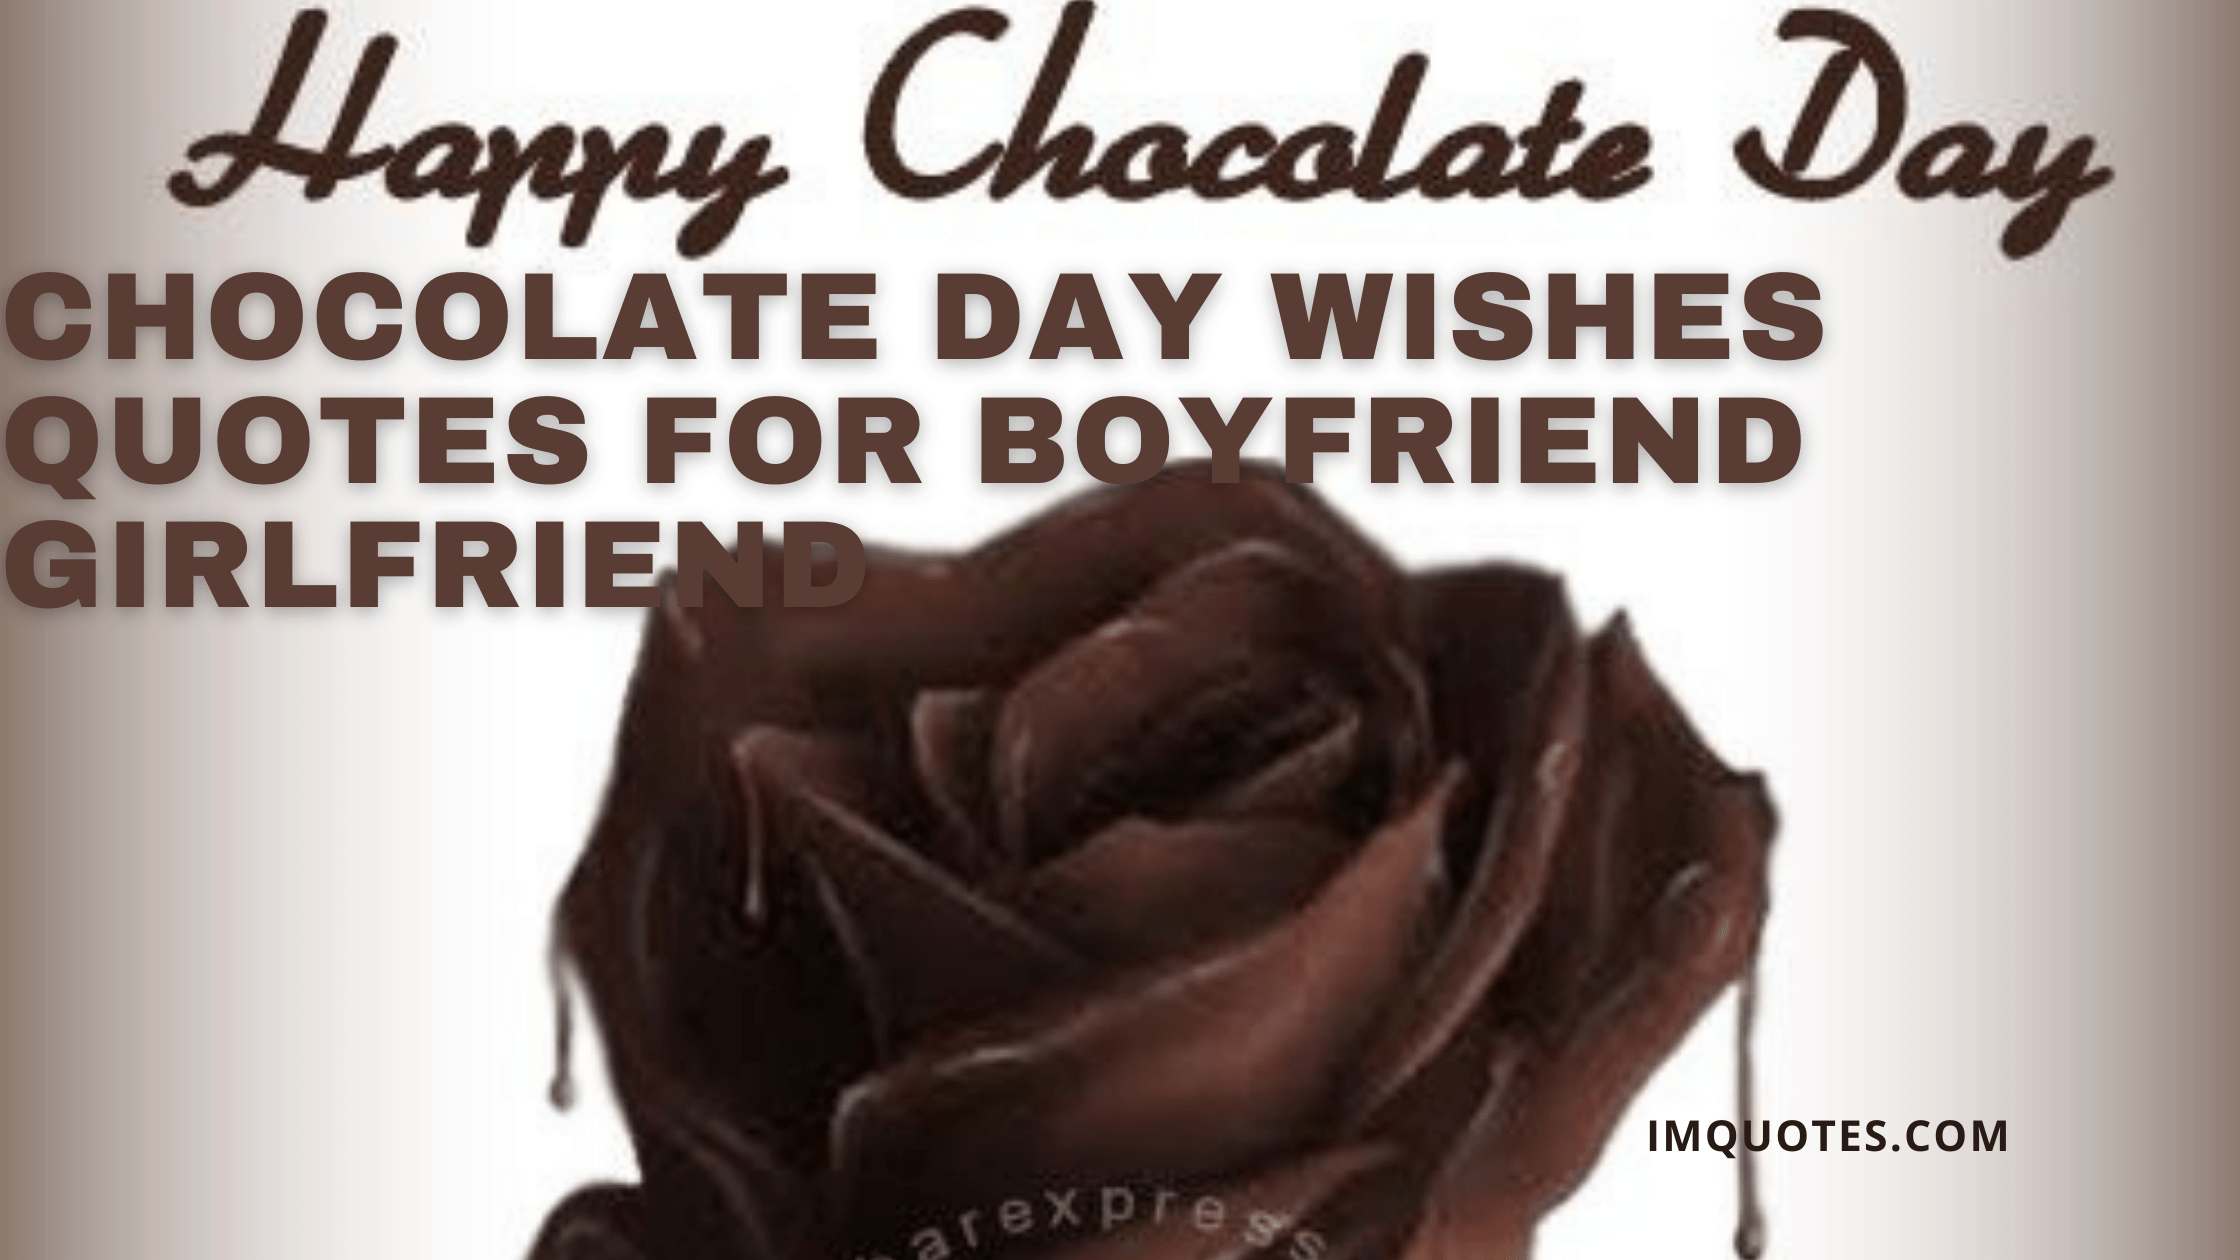 Chocolate Day Wishes Quotes for Boyfriend Girlfriend